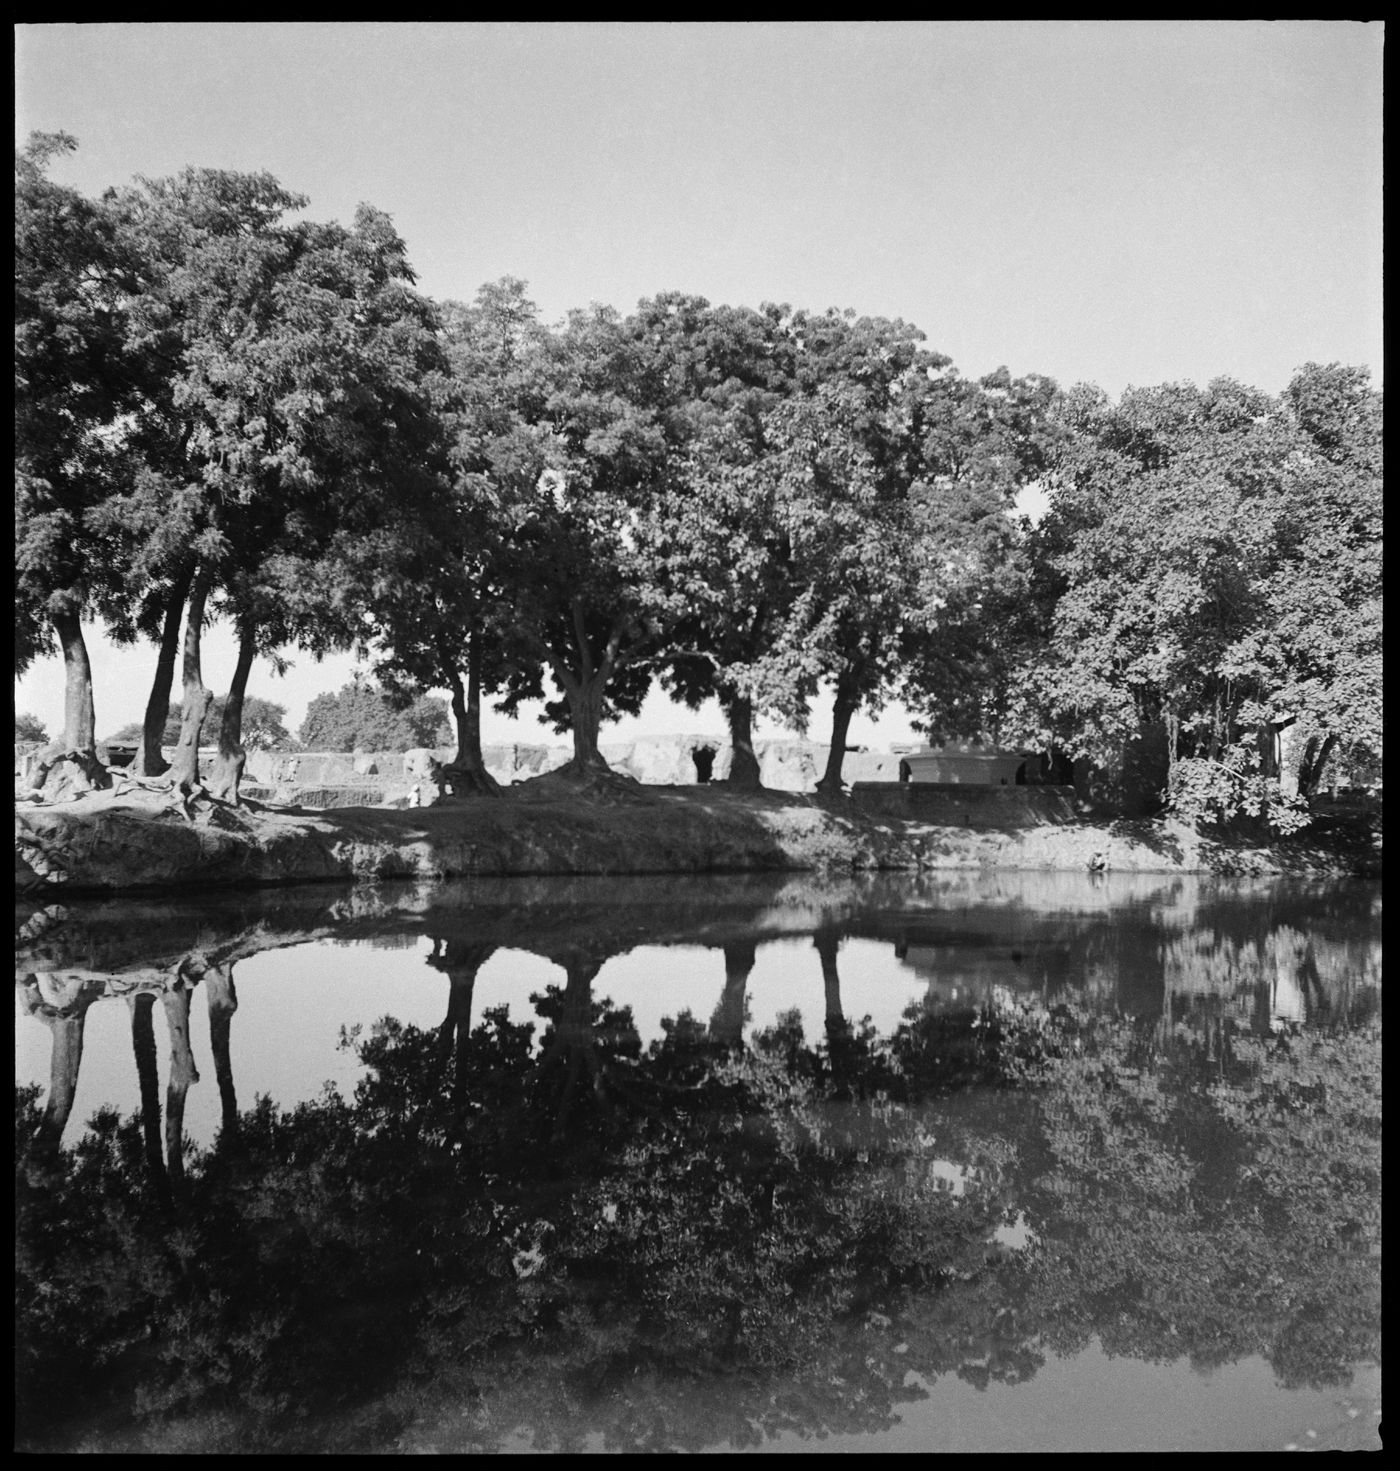 Lake with trees in the background in Chandigarh's area before the construction, India